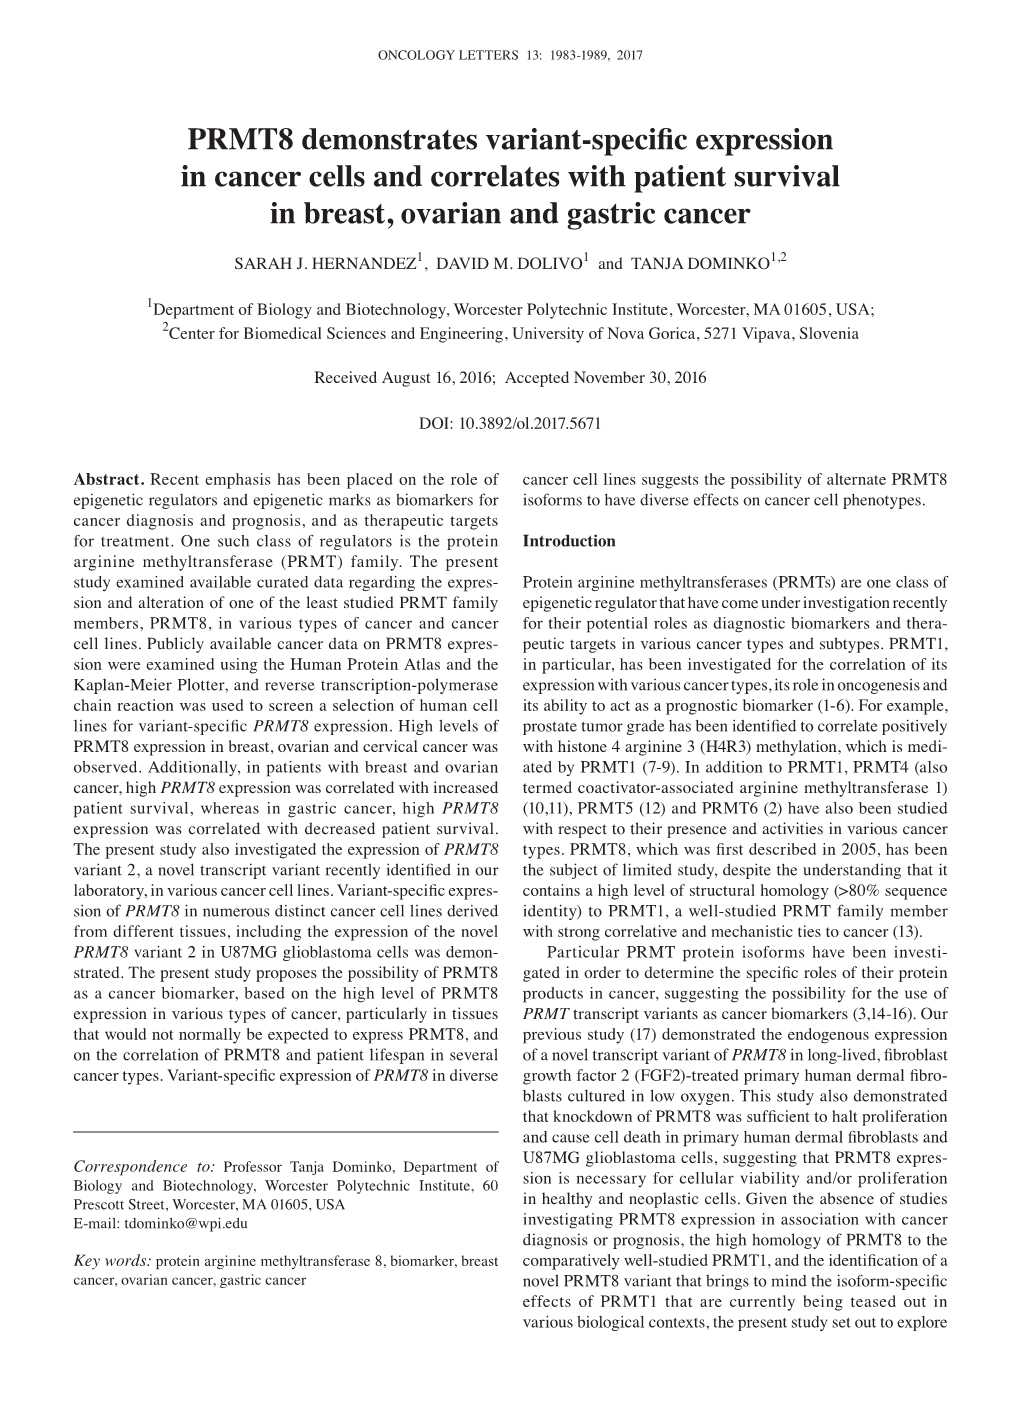 PRMT8 Demonstrates Variant‑Specific Expression in Cancer Cells and Correlates with Patient Survival in Breast, Ovarian and Gastric Cancer